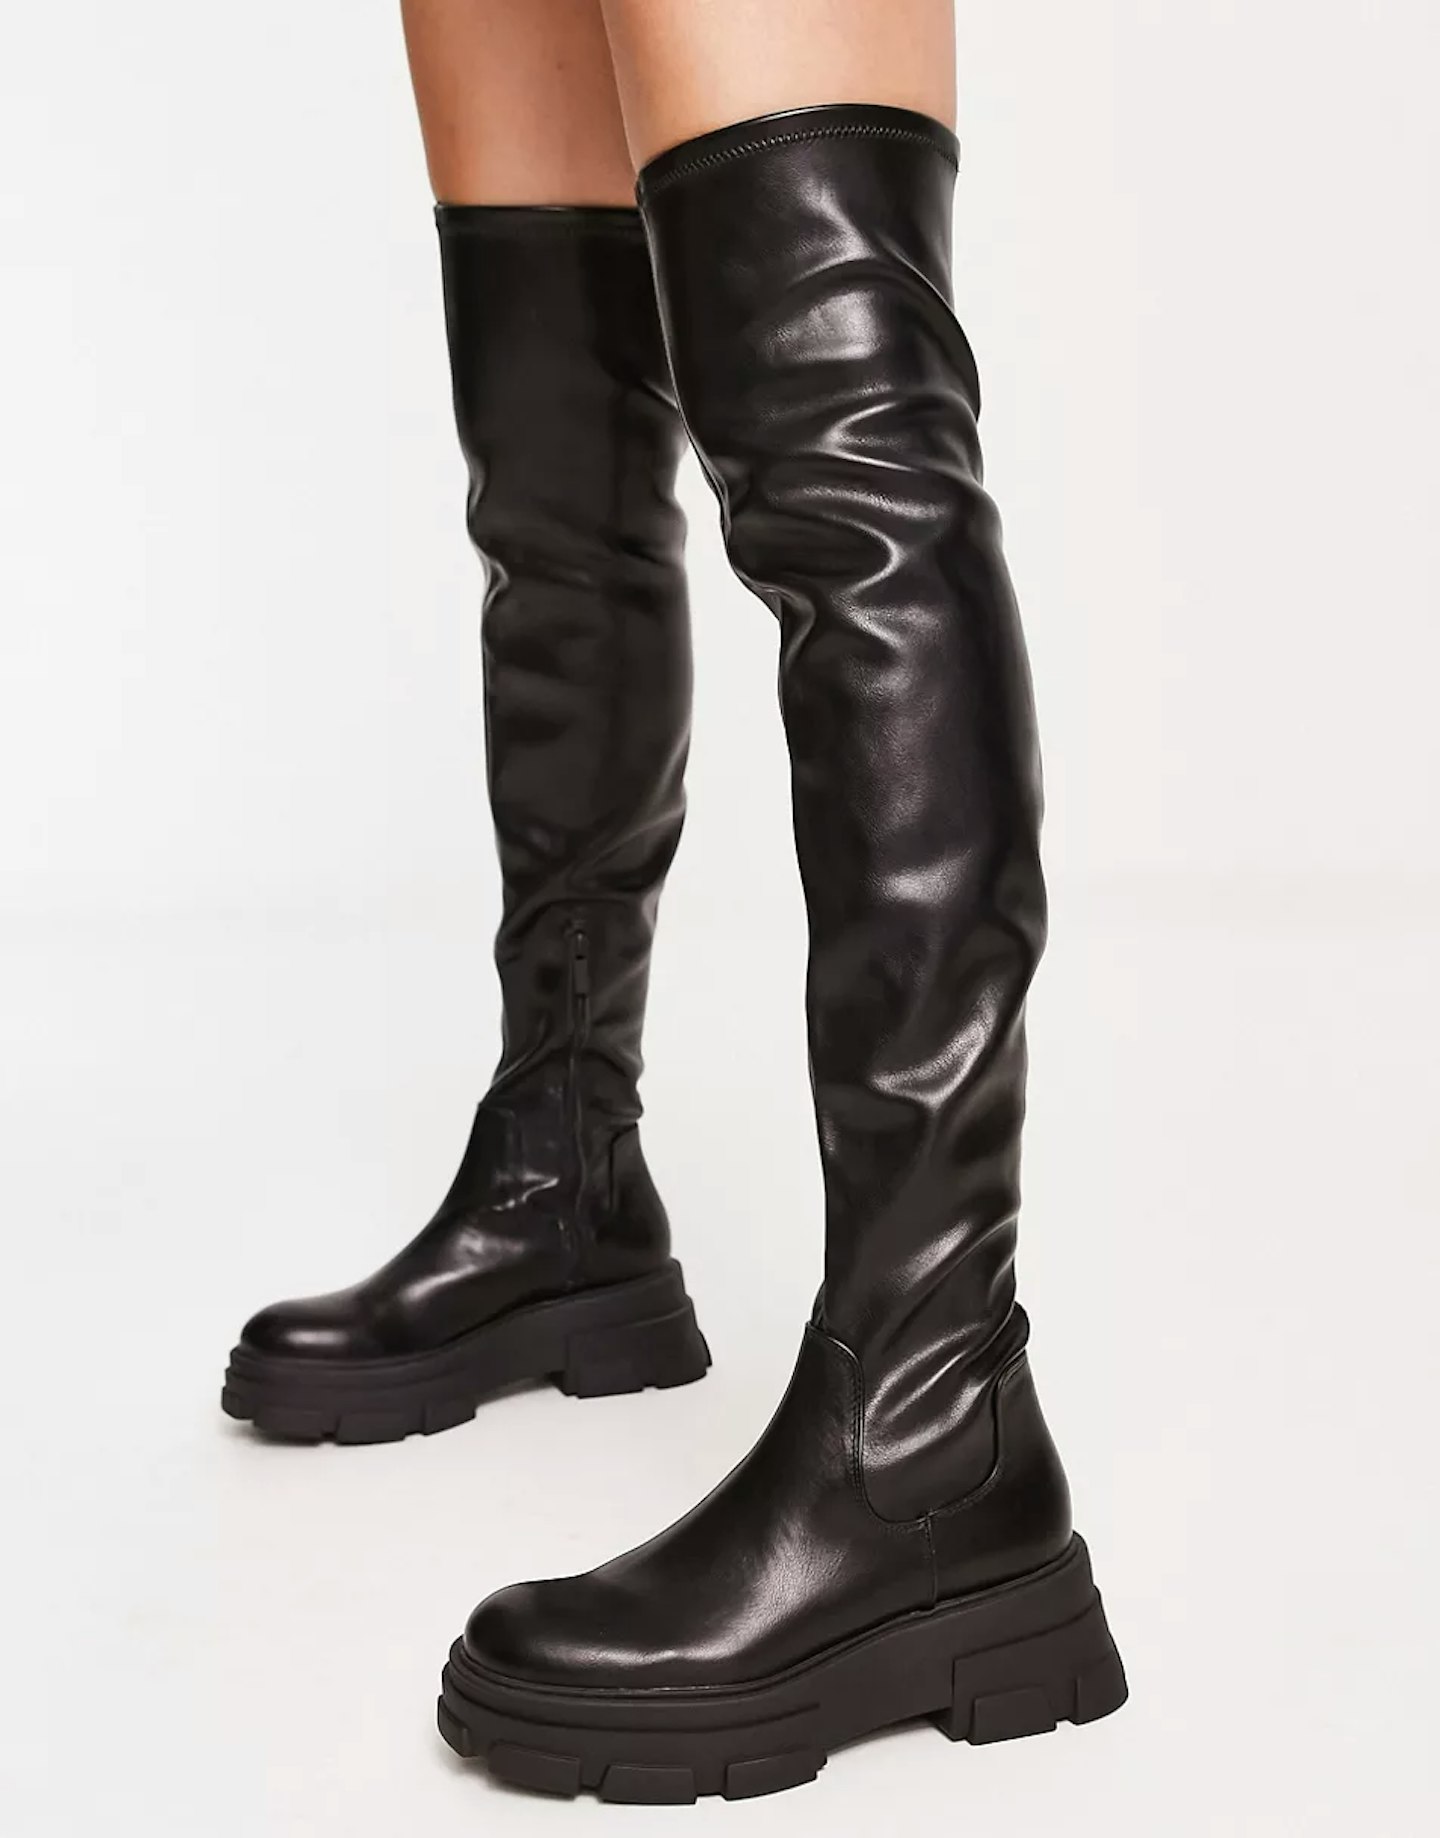 The Best Thigh-High Boots Now That It's Almost Autumn